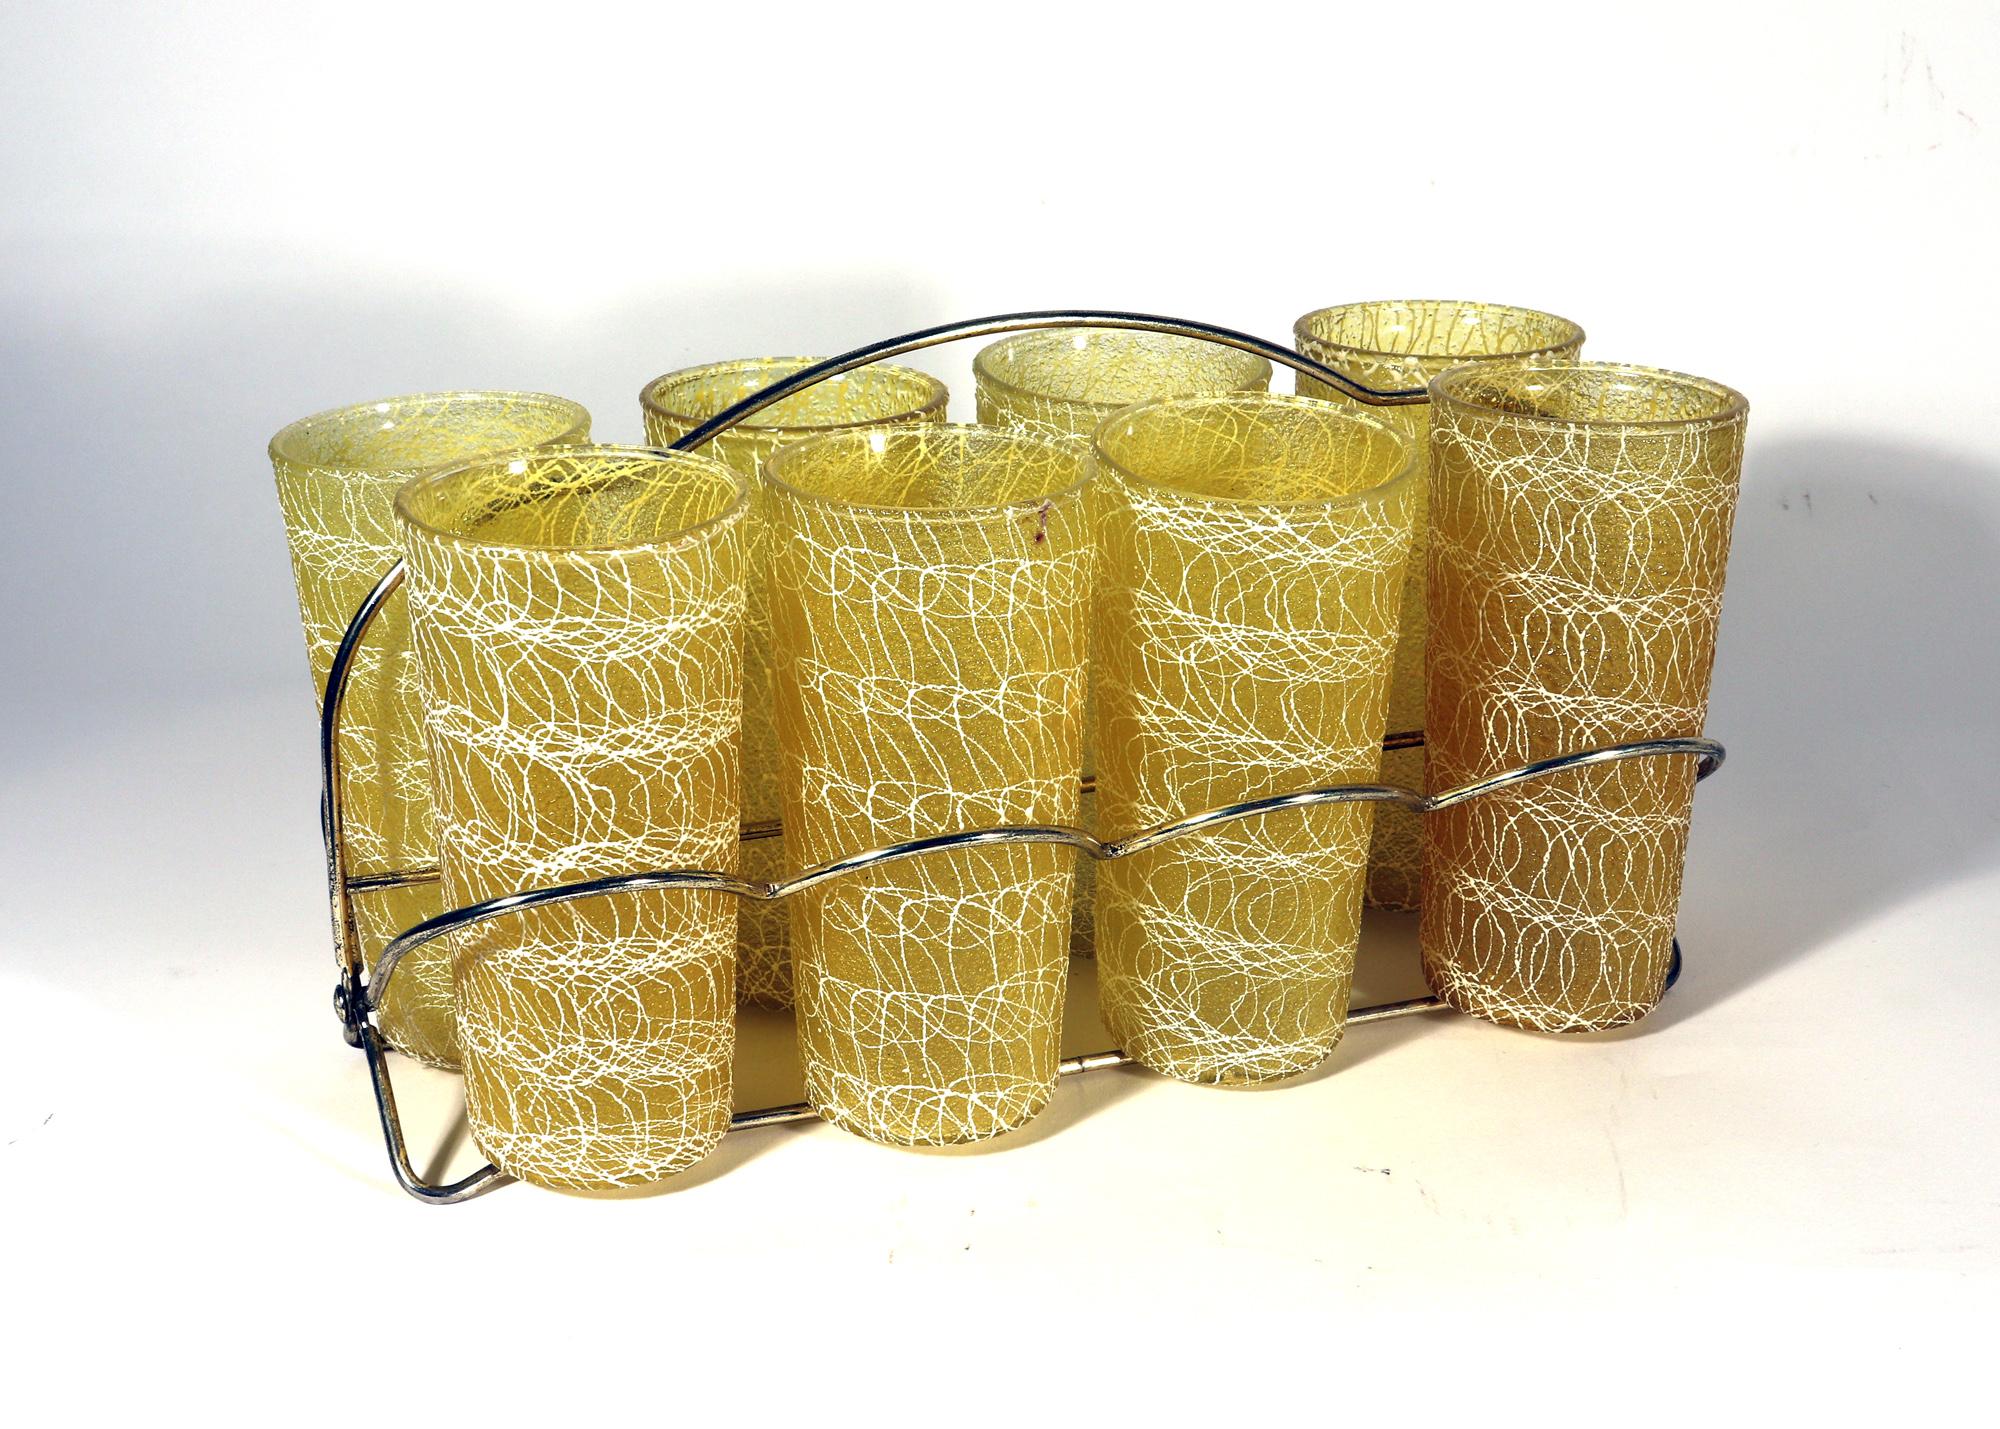 Vintage Glass Tumblers, Spaghetti String by Color Craft, Indianapolis In Good Condition For Sale In Downingtown, PA